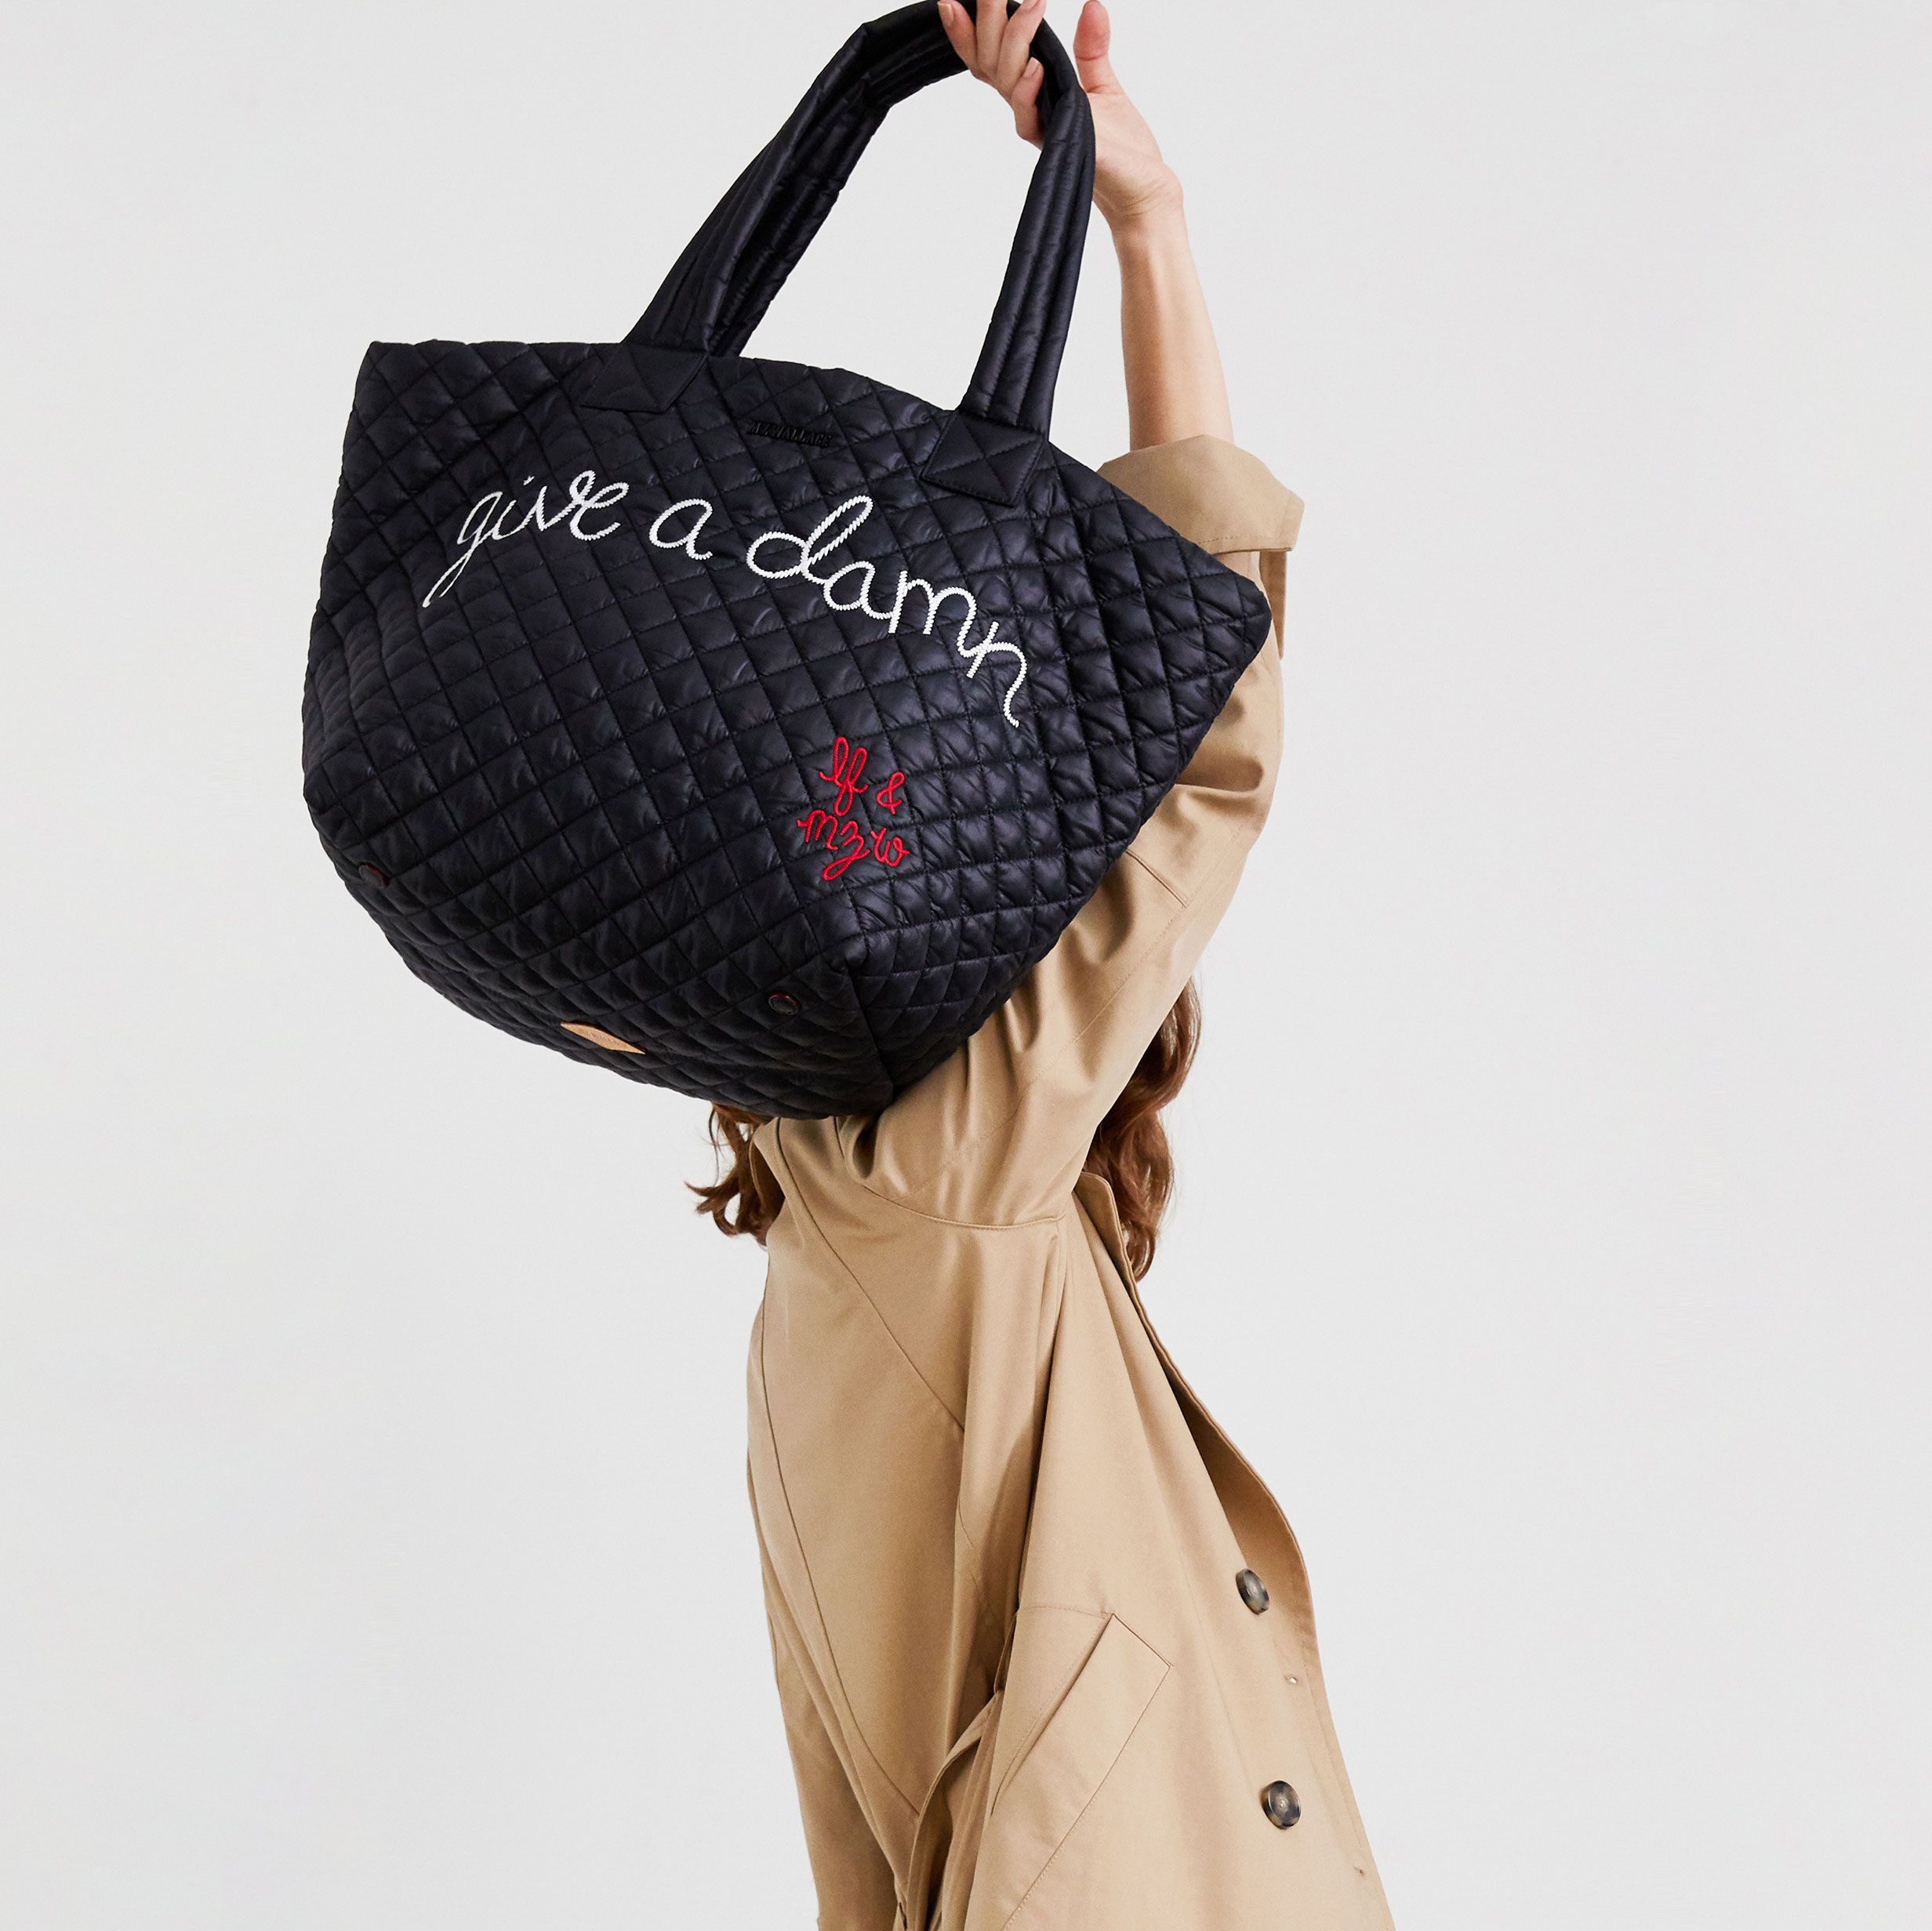 Reply to @growwithtara midi woven sac!!! The BEST!! #purse